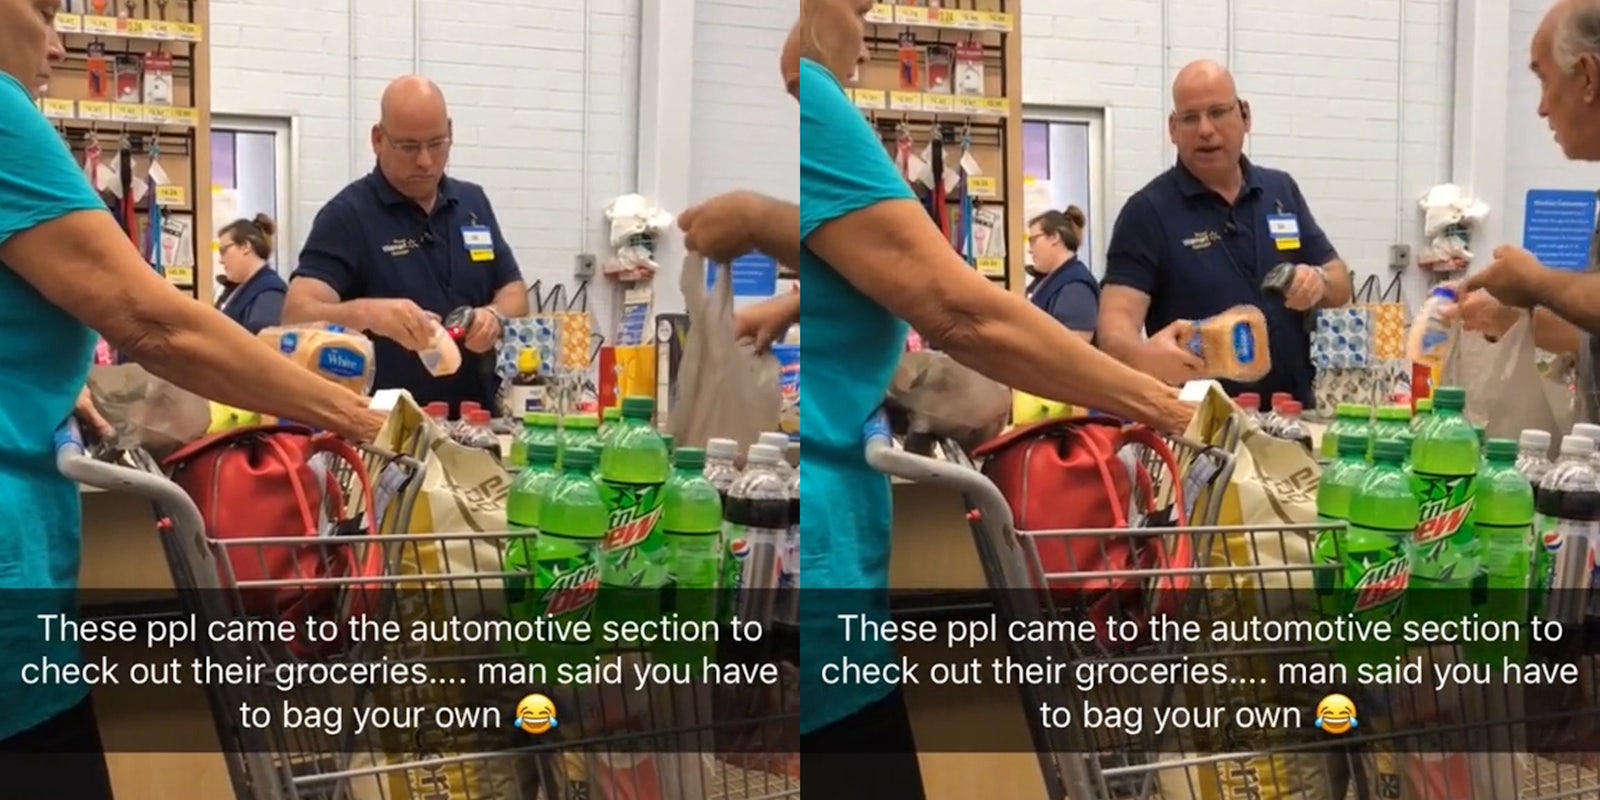 workers scans food for people with grocery cart at automotive counter in walmart with caption 'these ppl came to the automotive section to check out their groceries... man said you have to bag your own'